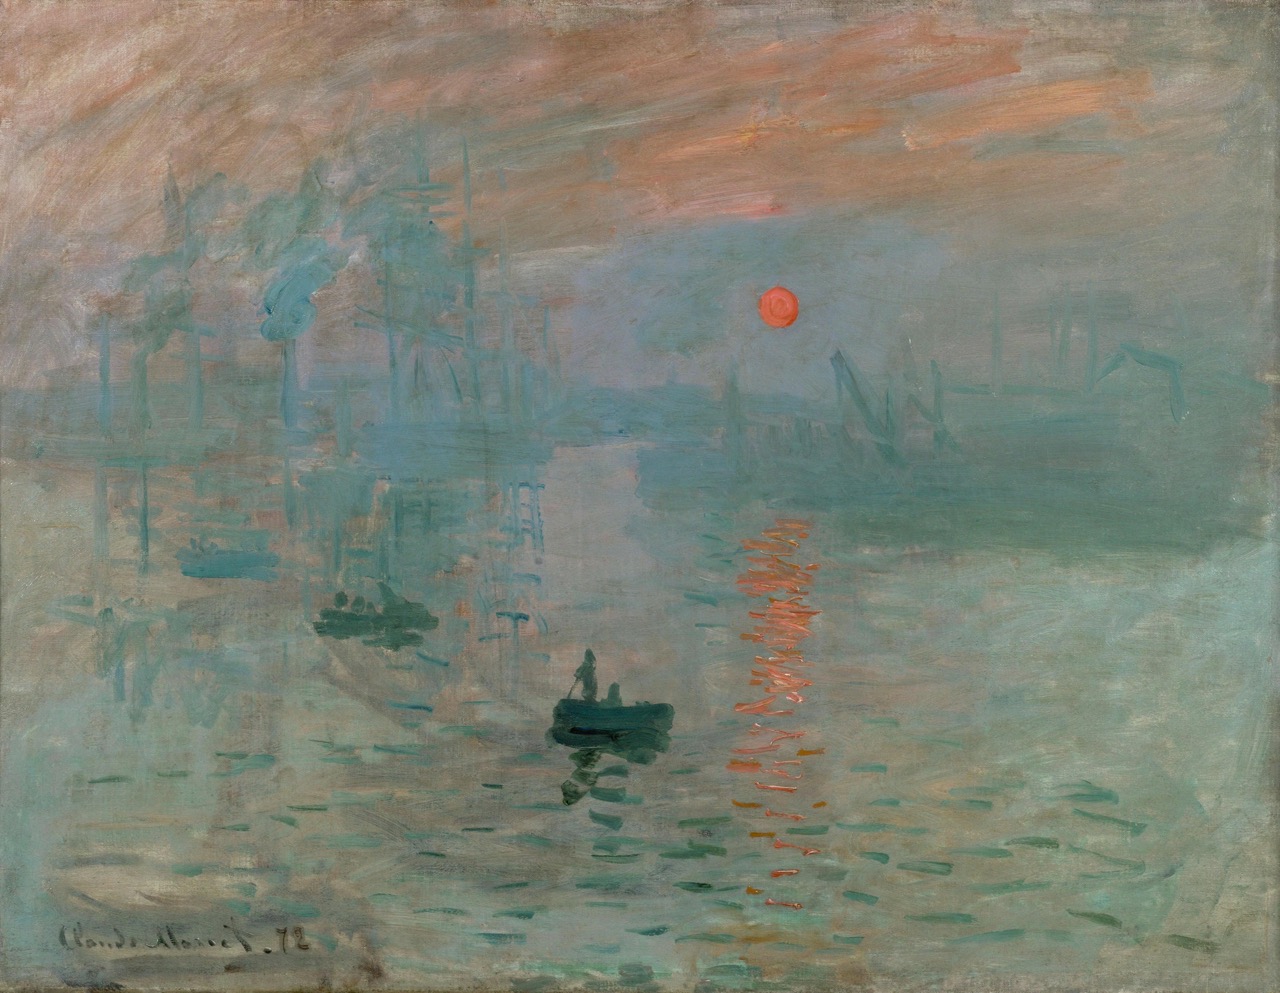 painting by Monet showing an impression of a misty water surface with a red sun in the background and a lone fisherboat in the middle of the water